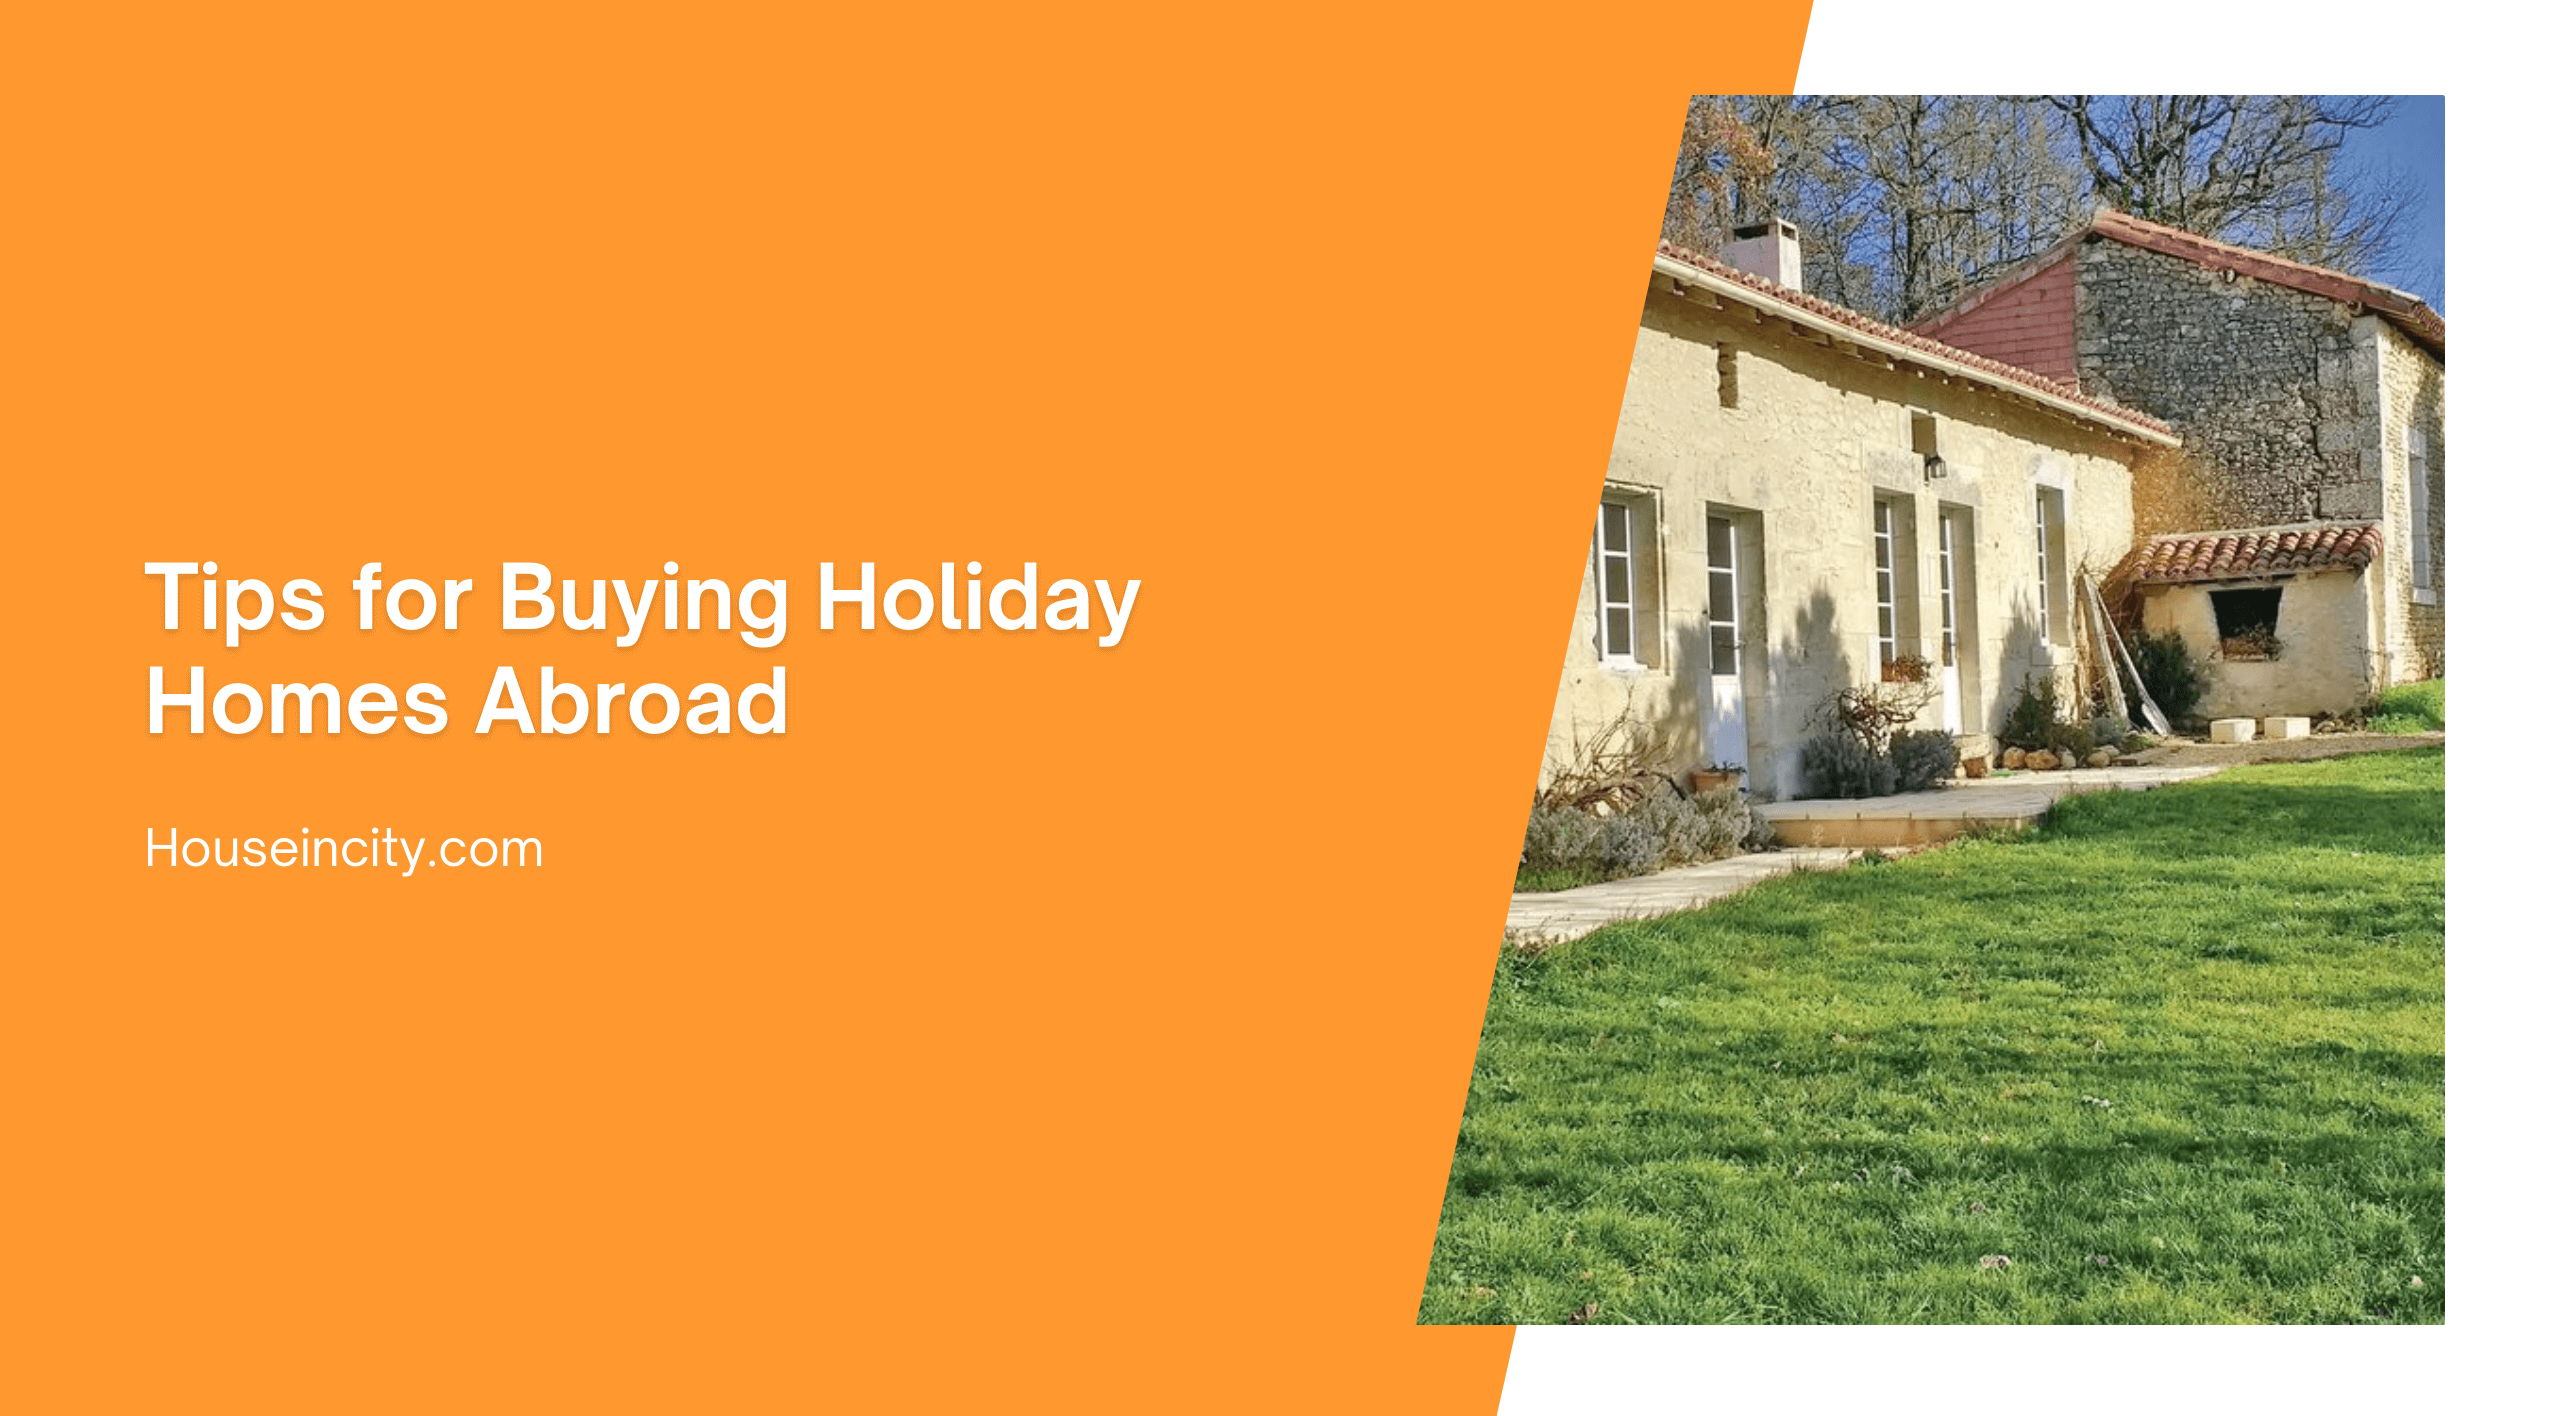 Tips for Buying Holiday Homes Abroad